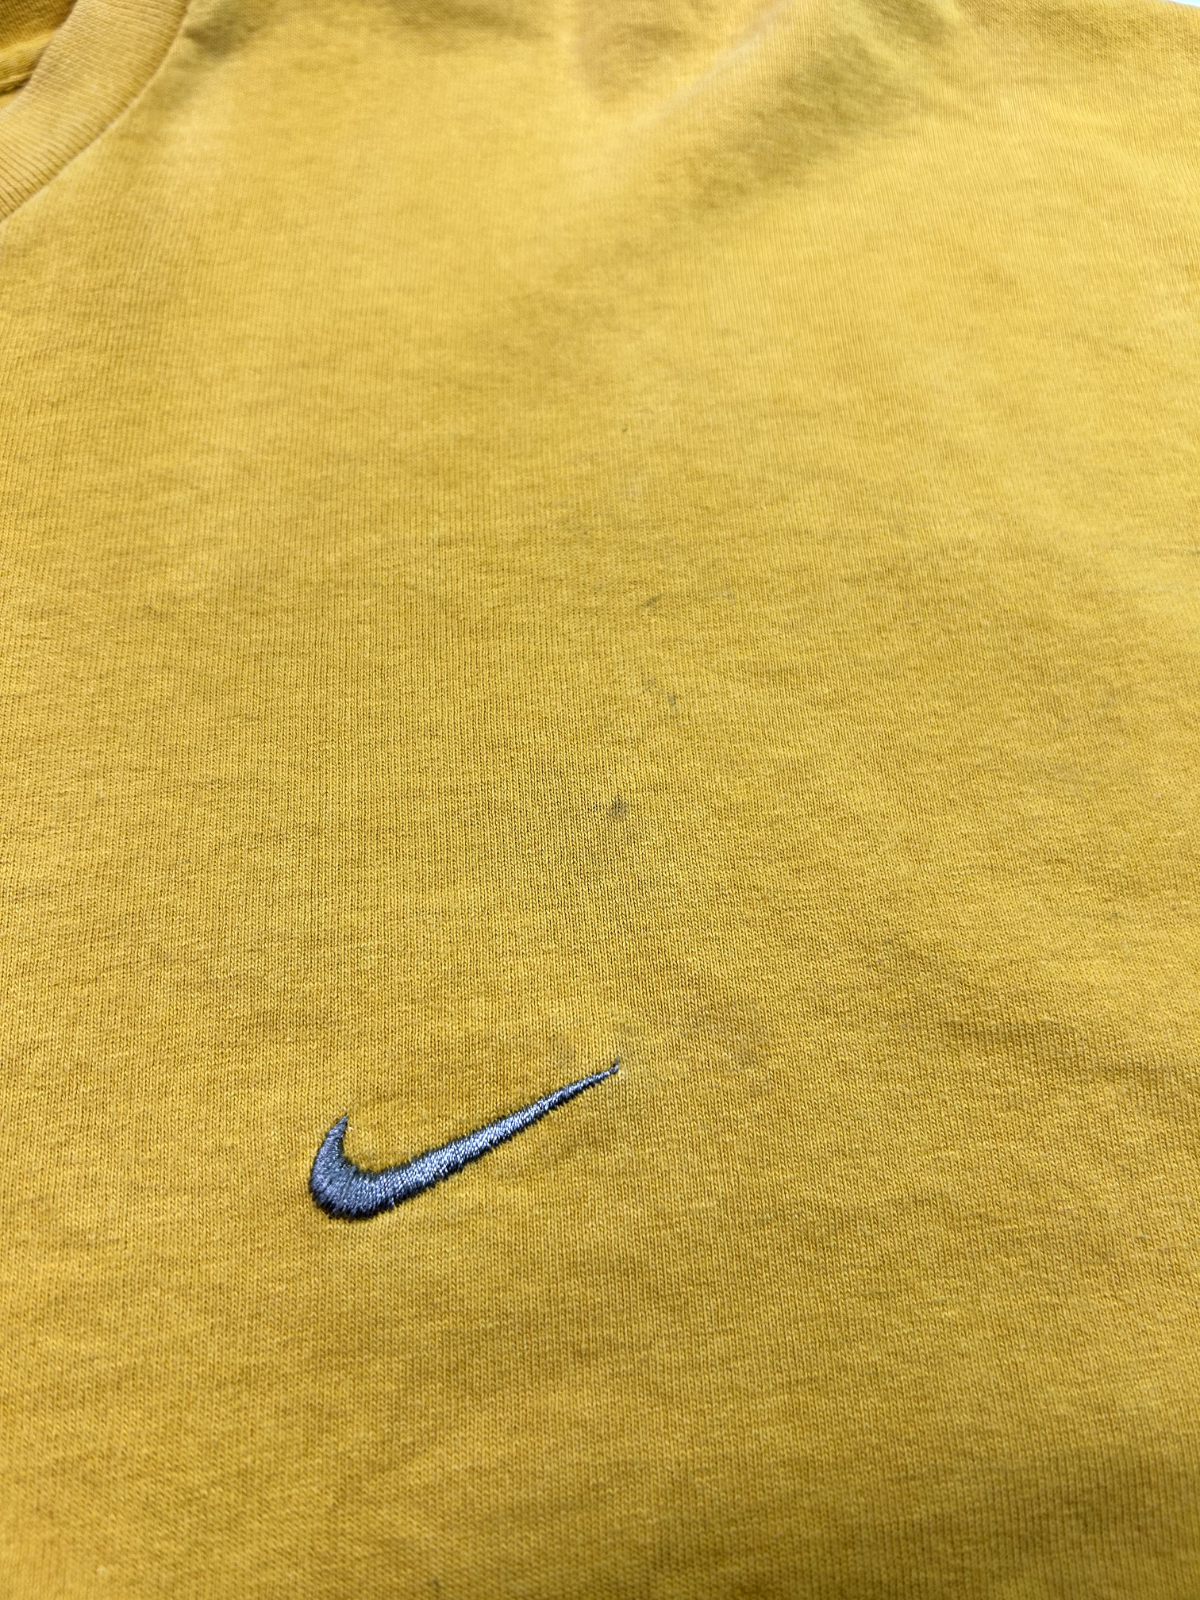 Vintage Y2K Nike Embroidered Mini Swoosh T-Shirt Size 2XL Yellow